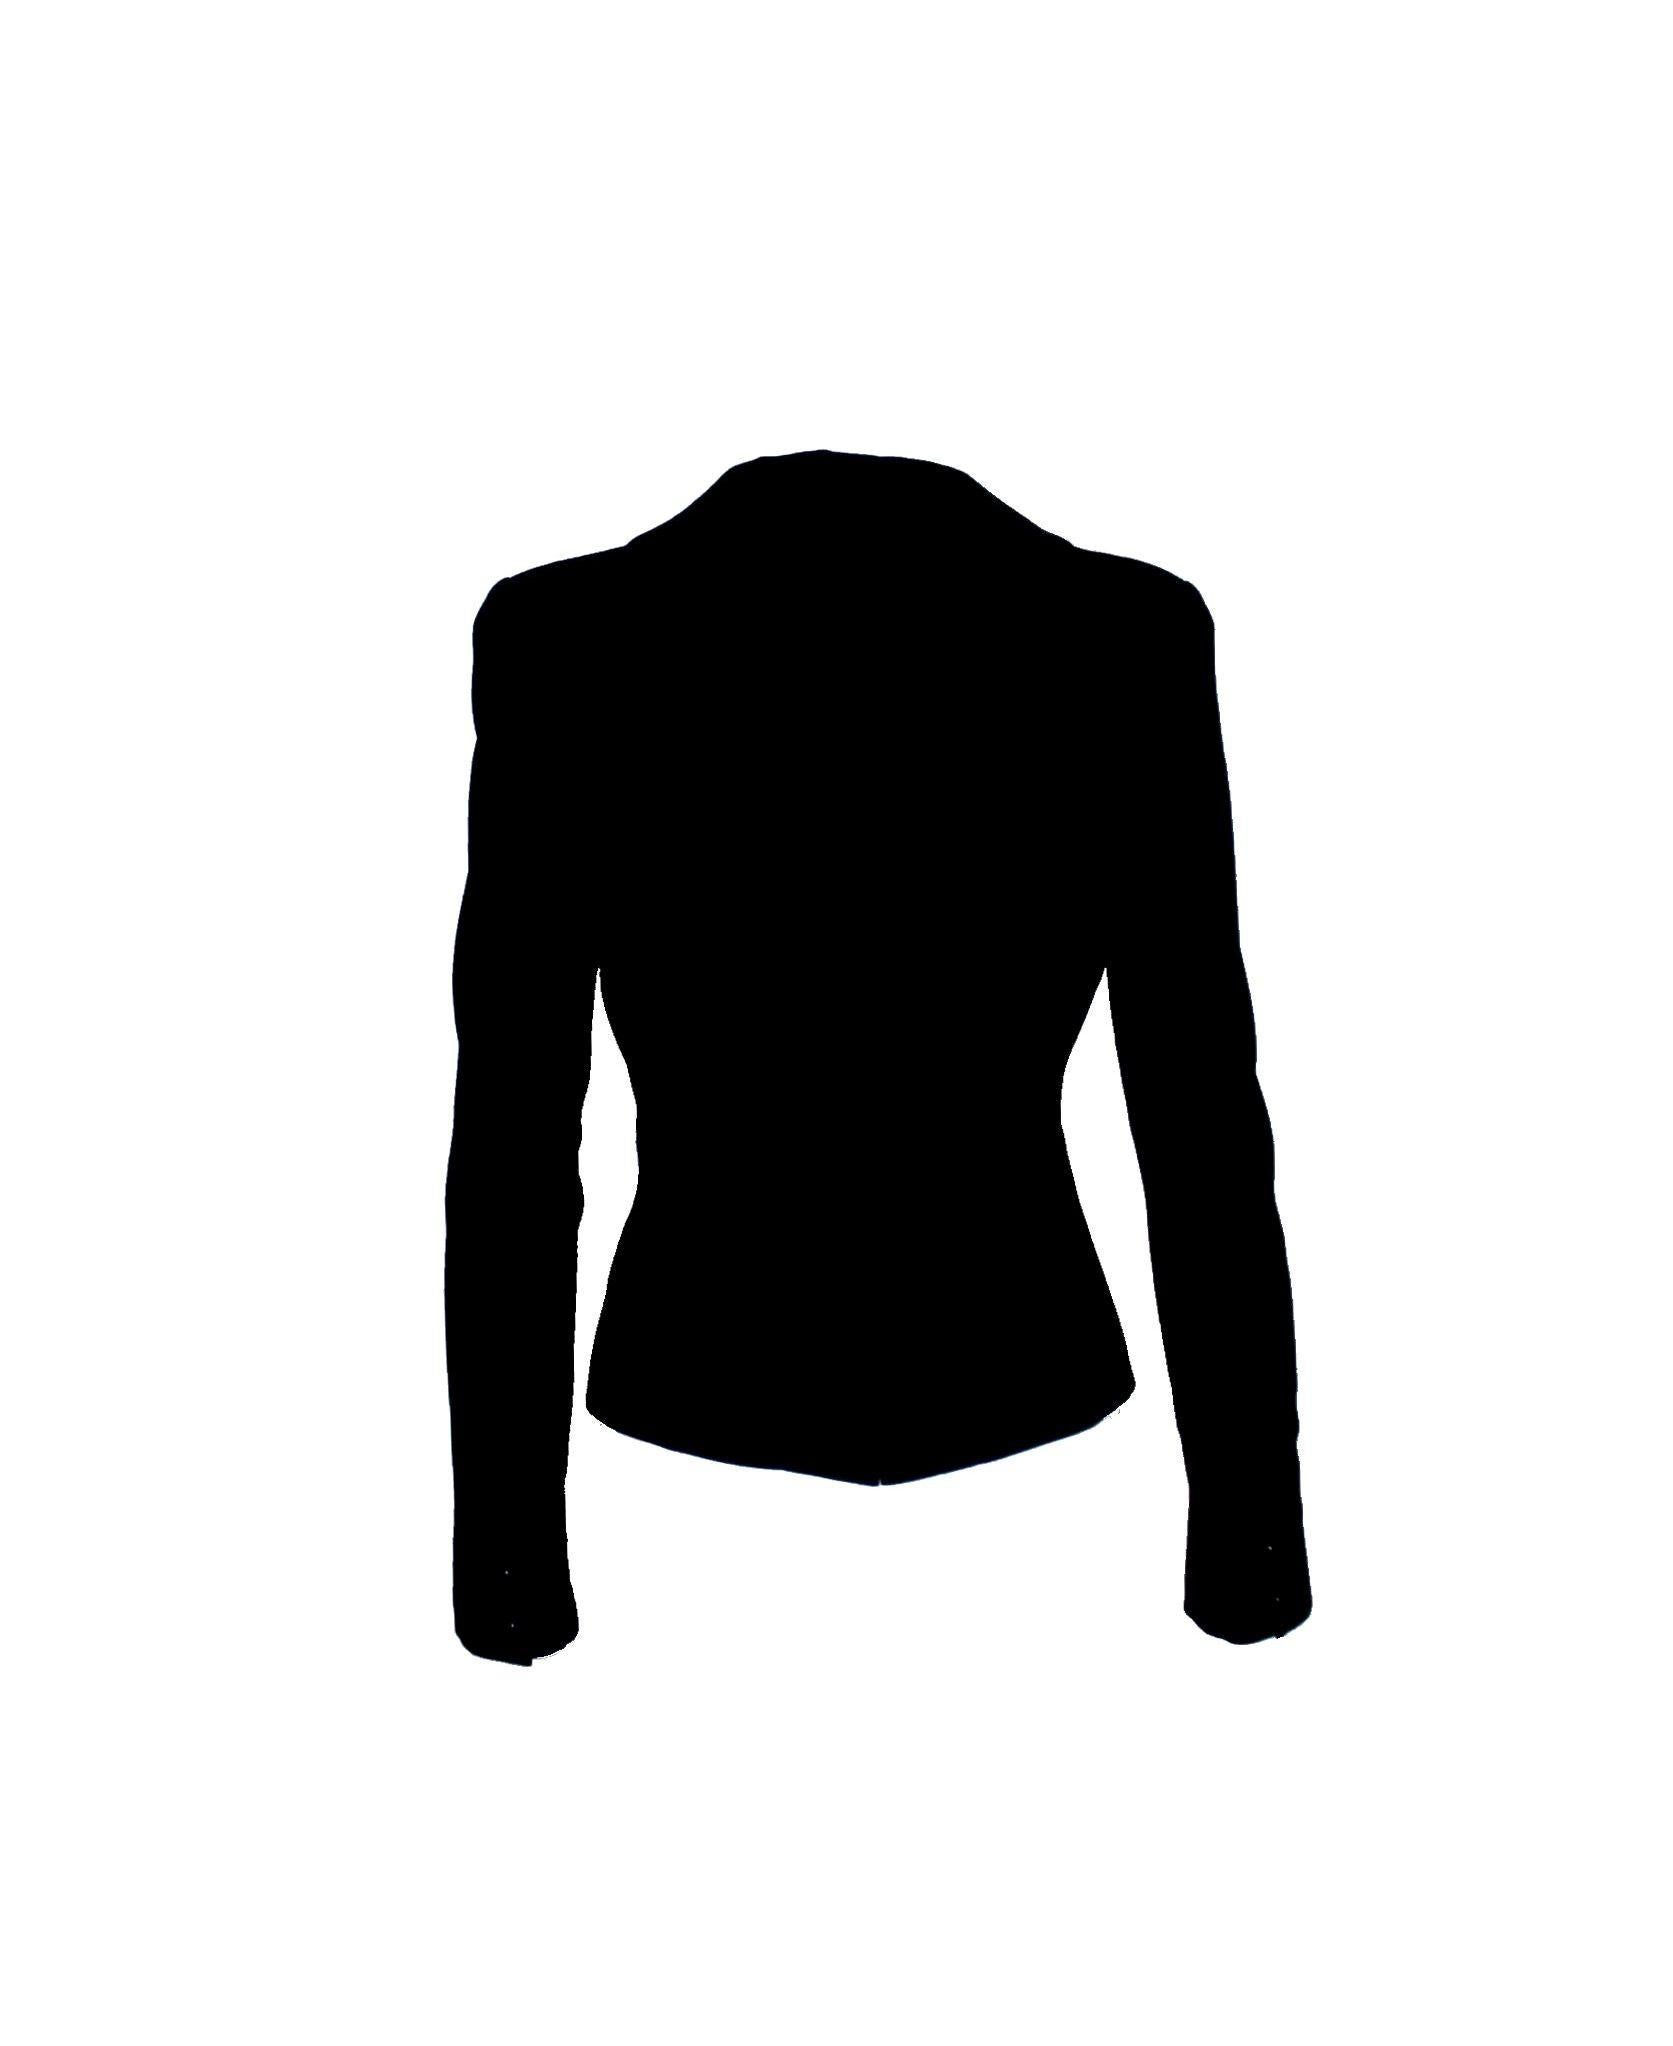 Beautiful CHANEL little black jacket designed by Karl Lagerfeld
A true CHANEL signature item that will last you for many years
The classic little black jacket Chanel is so famous for 
Beautifully tailored, fitted style
Peaked lapels
Structured